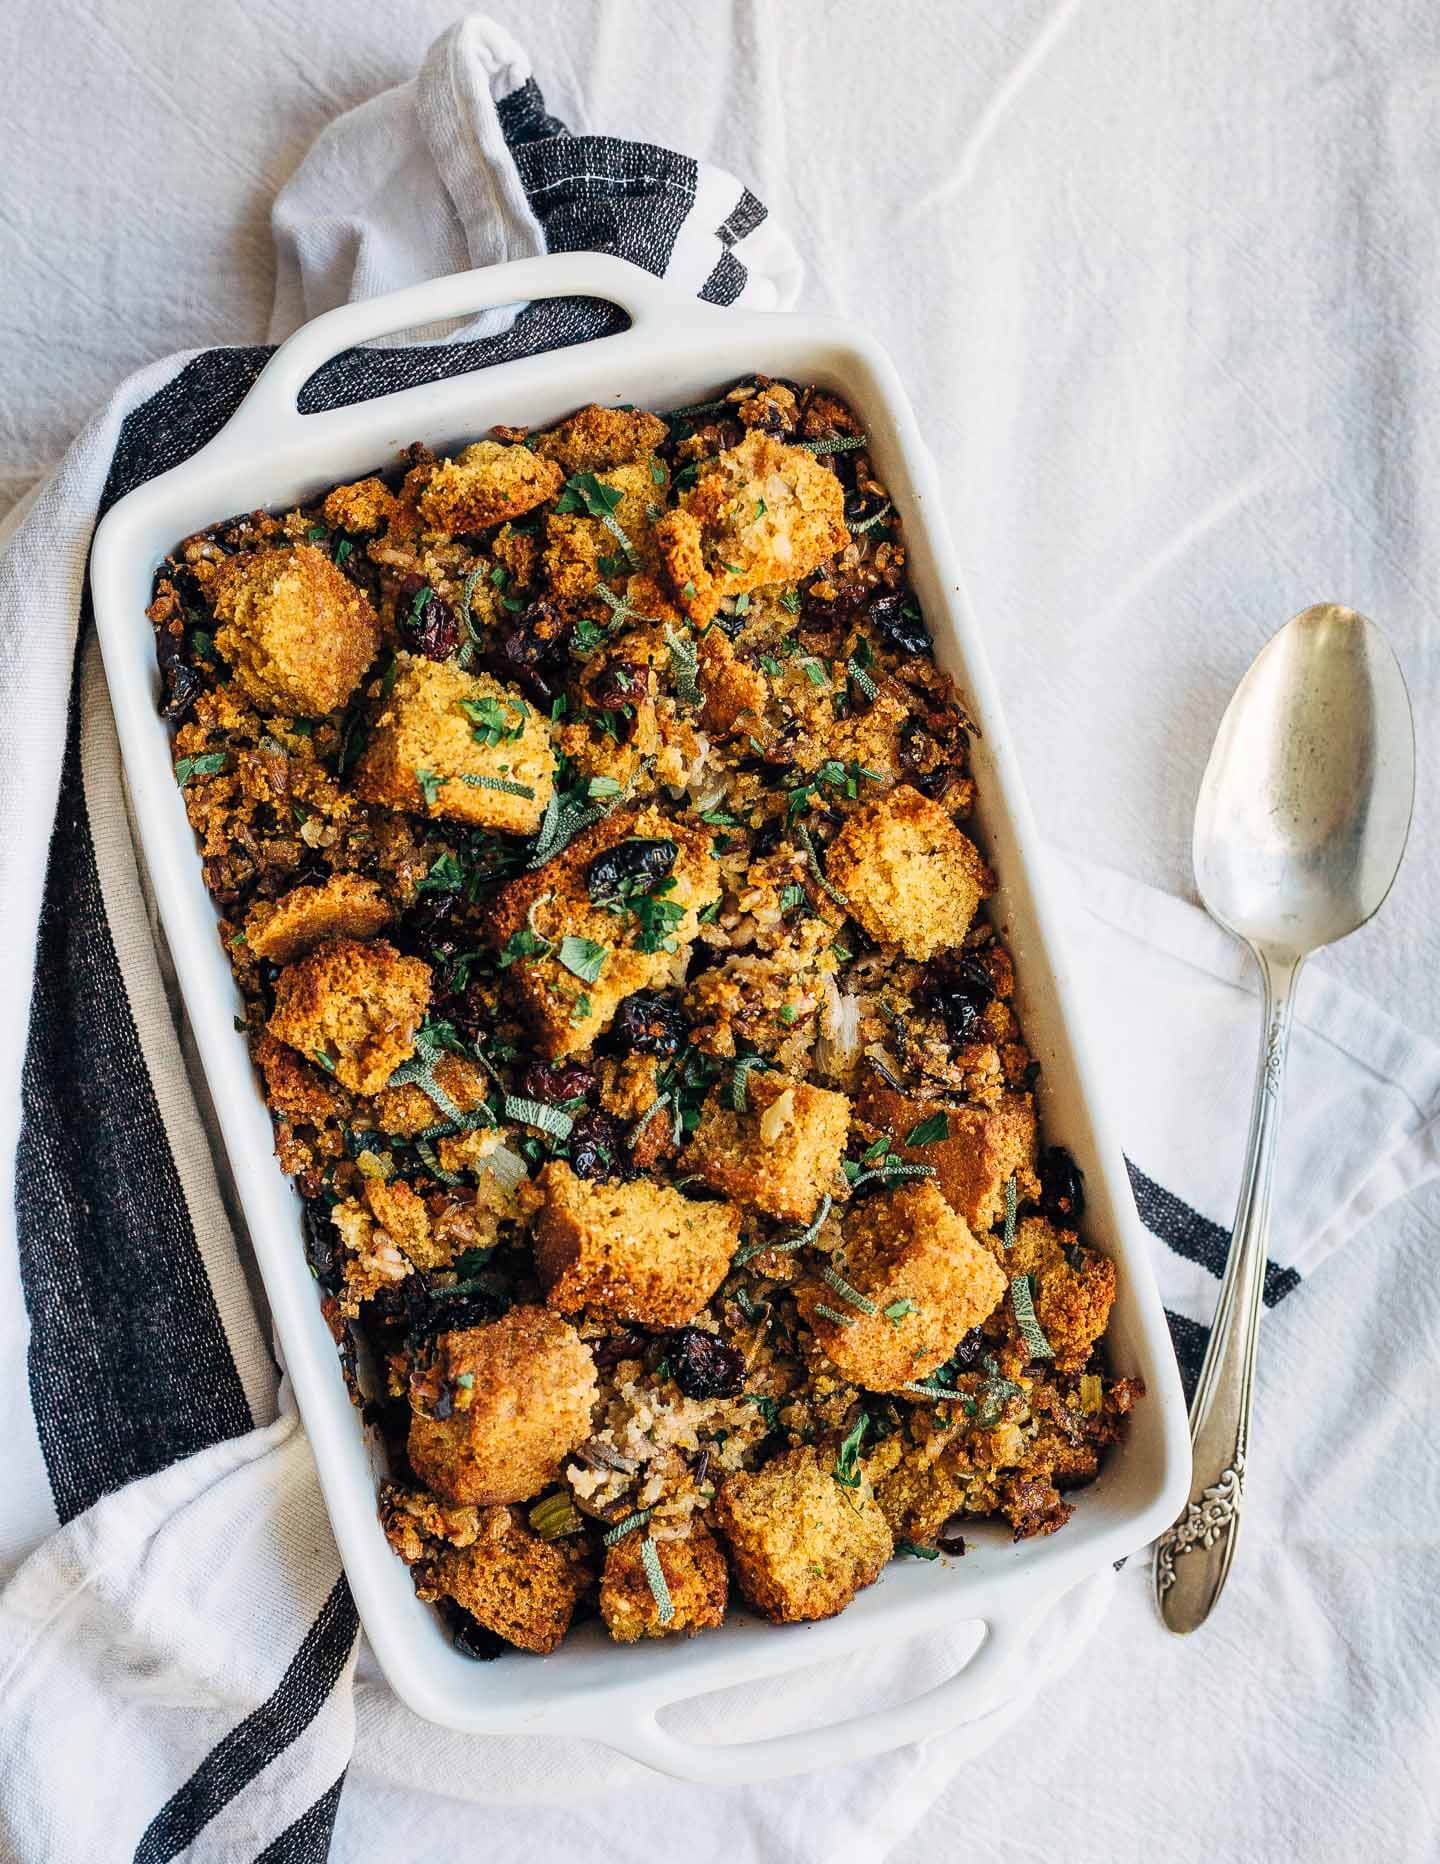 A rich, sating vegetarian Friendsgiving menu and a plant-based, gluten-free recipe for wild rice and cornbread stuffing.